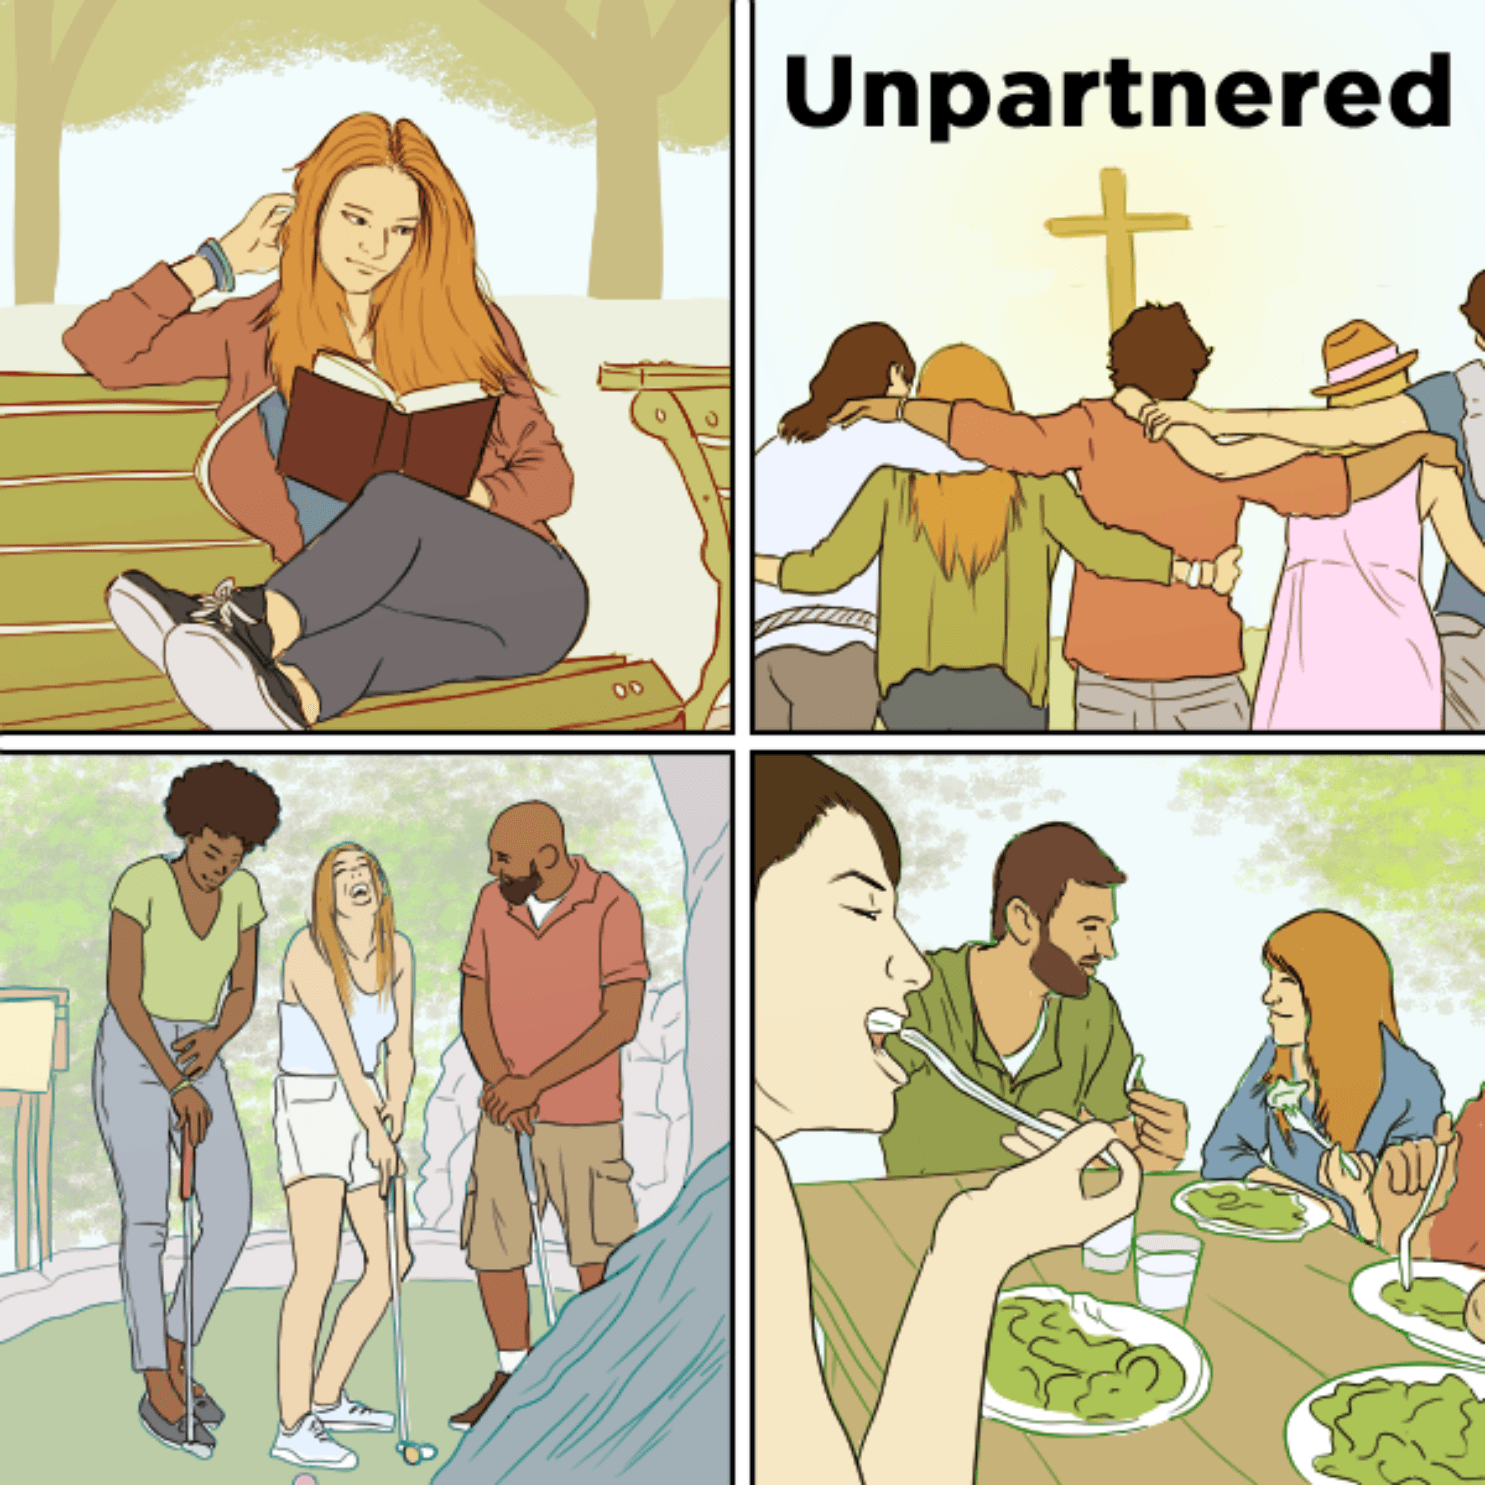 Thumbnail for "Unpartnered: Building A Full, Single Life".